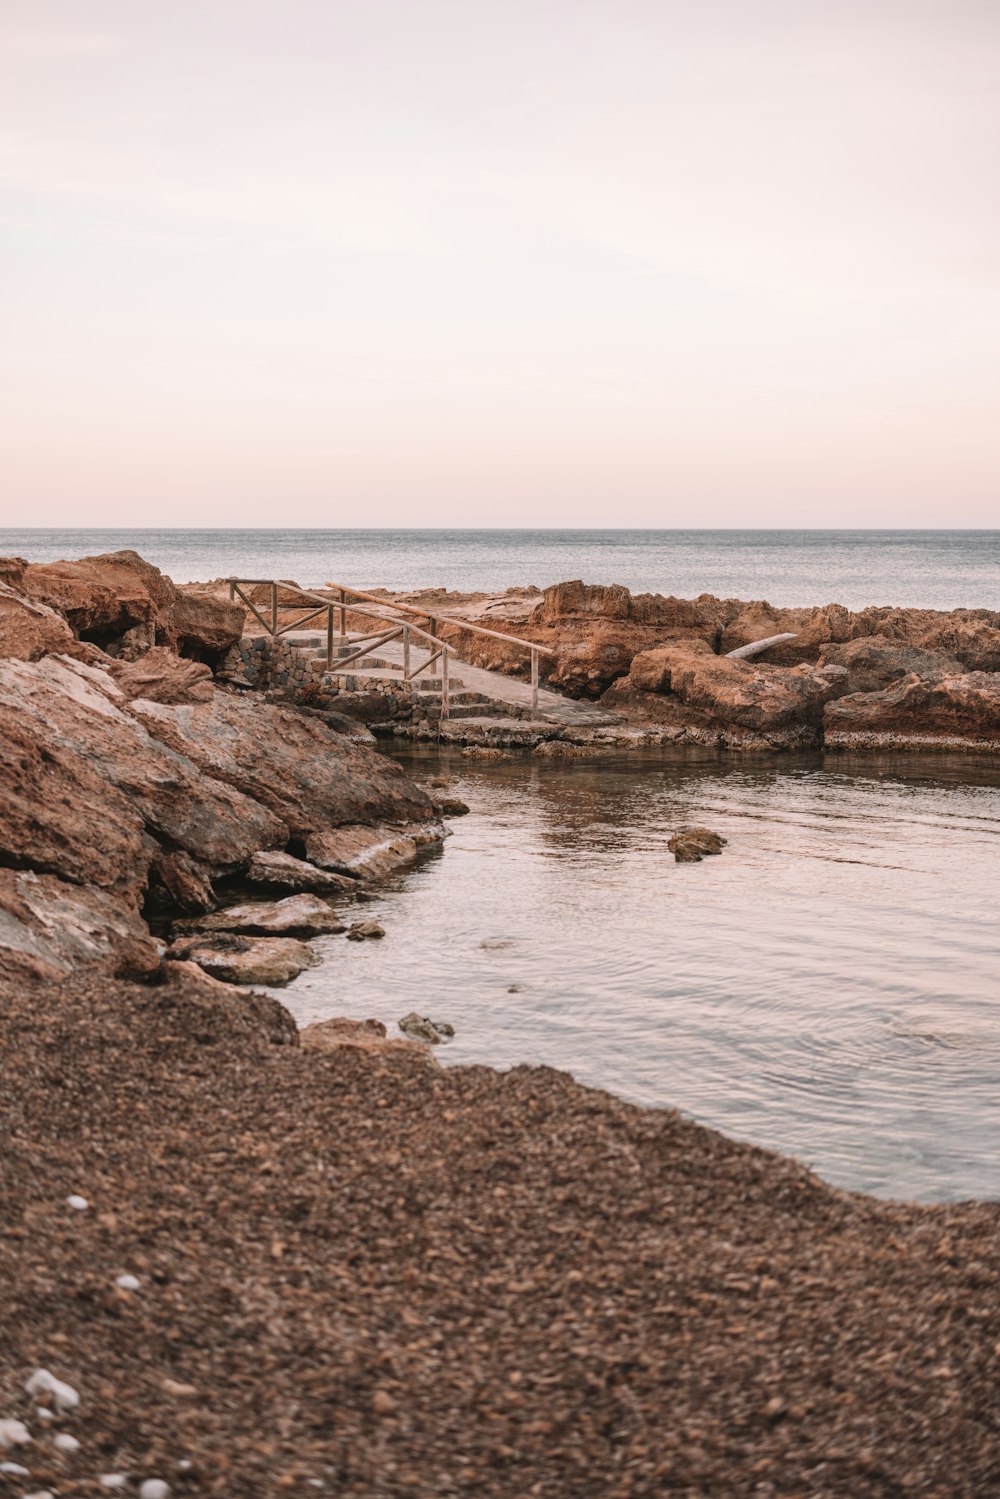 a rocky shore with a wooden walkway leading to the water